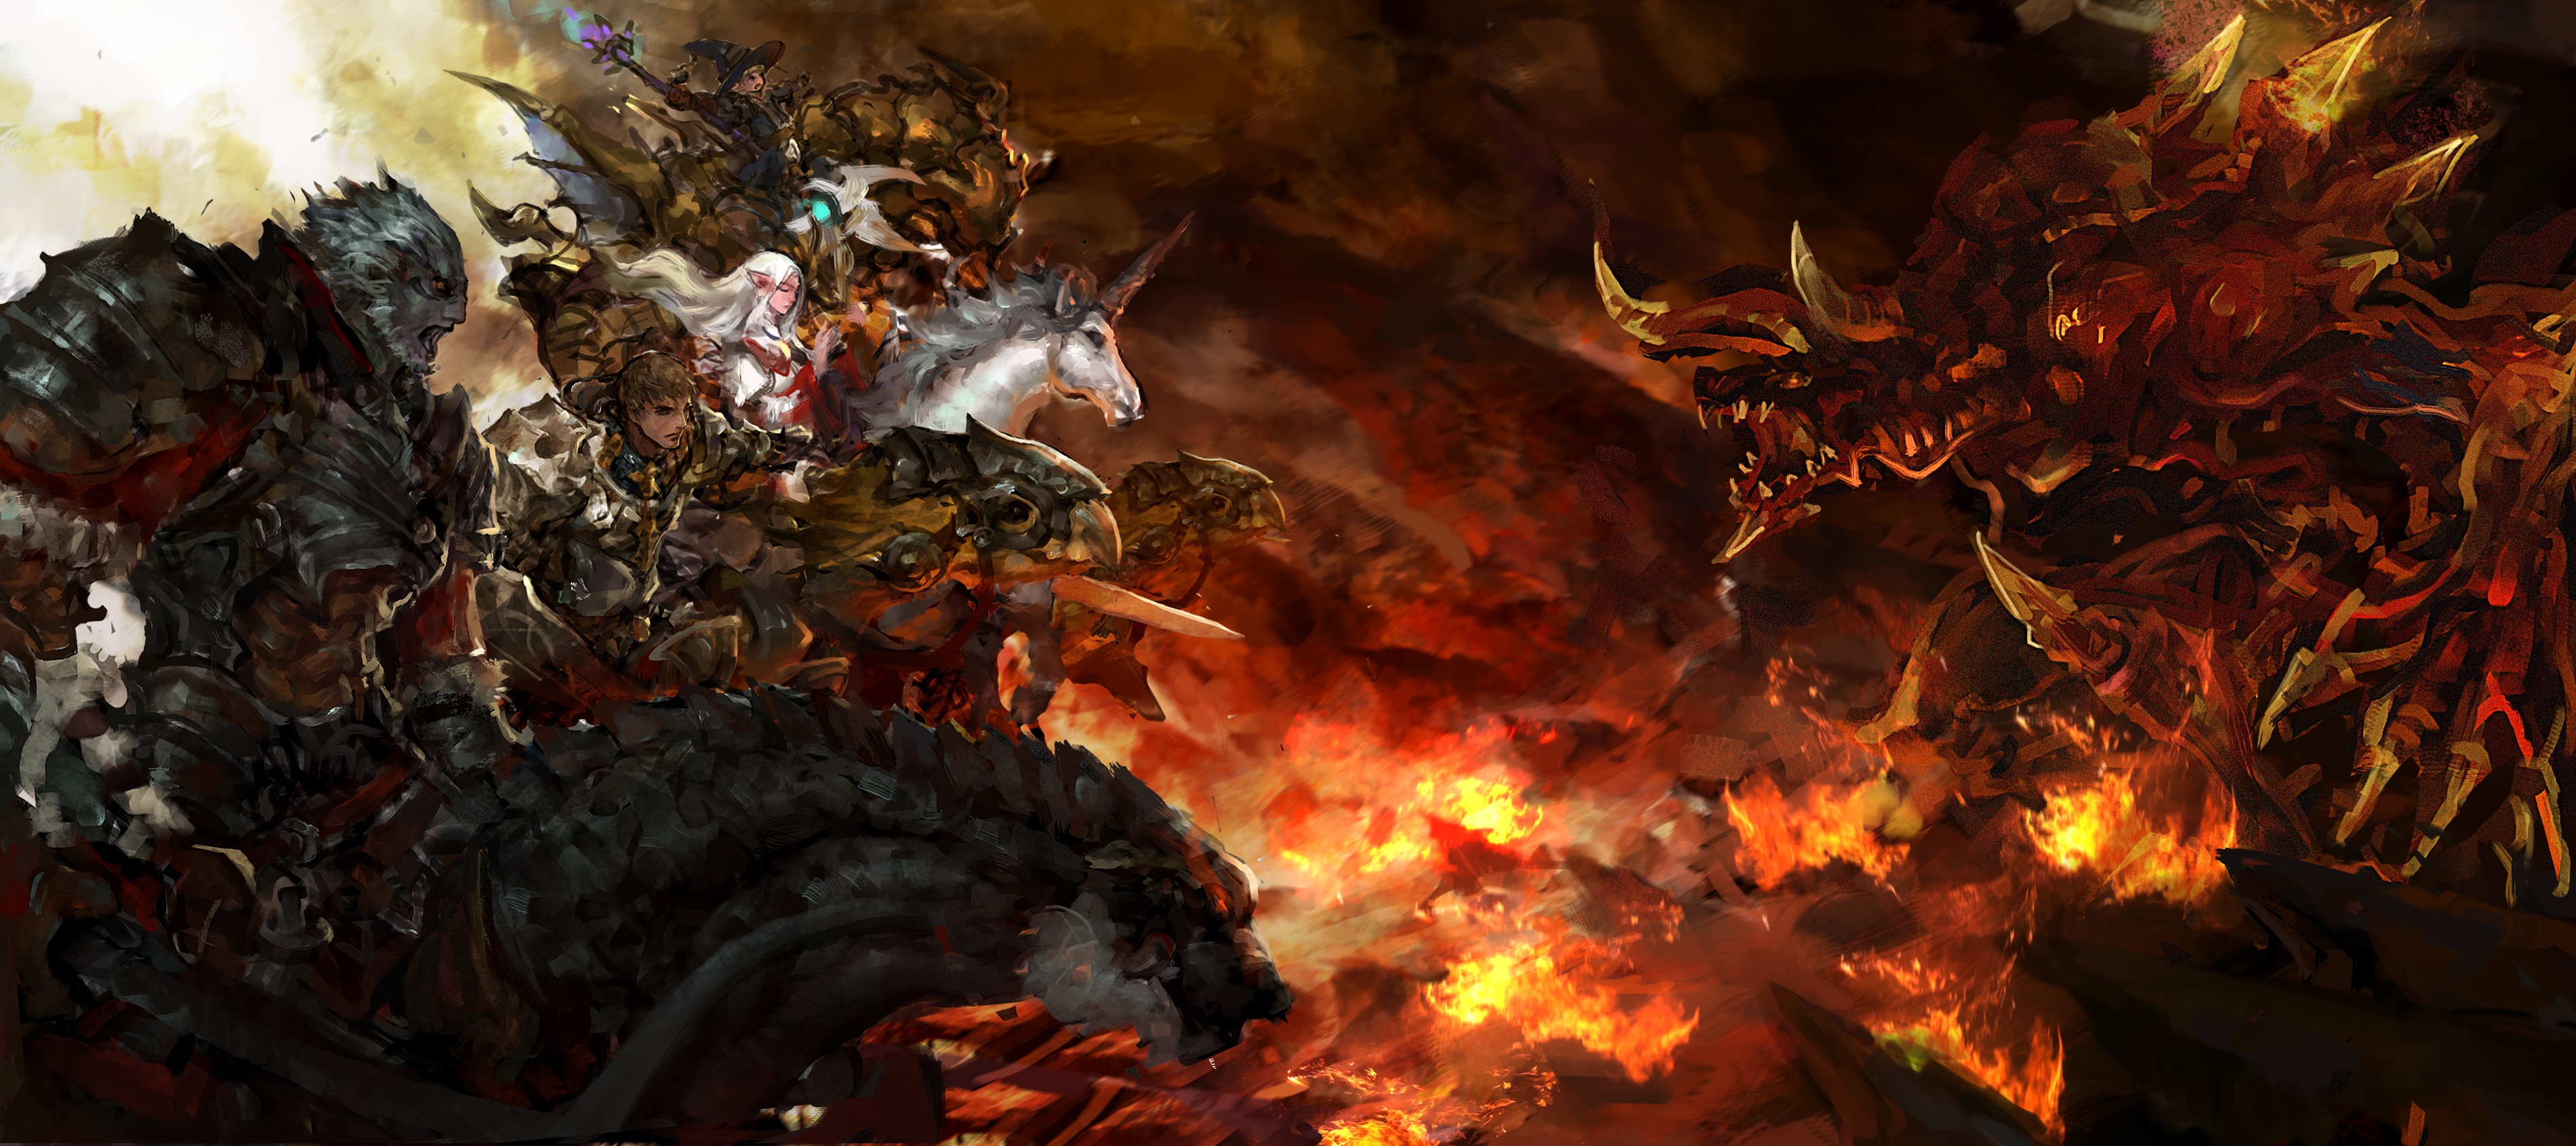 Final Fantasy Xiv A Realm Reborn Fanart Ifrit And Odin 2p